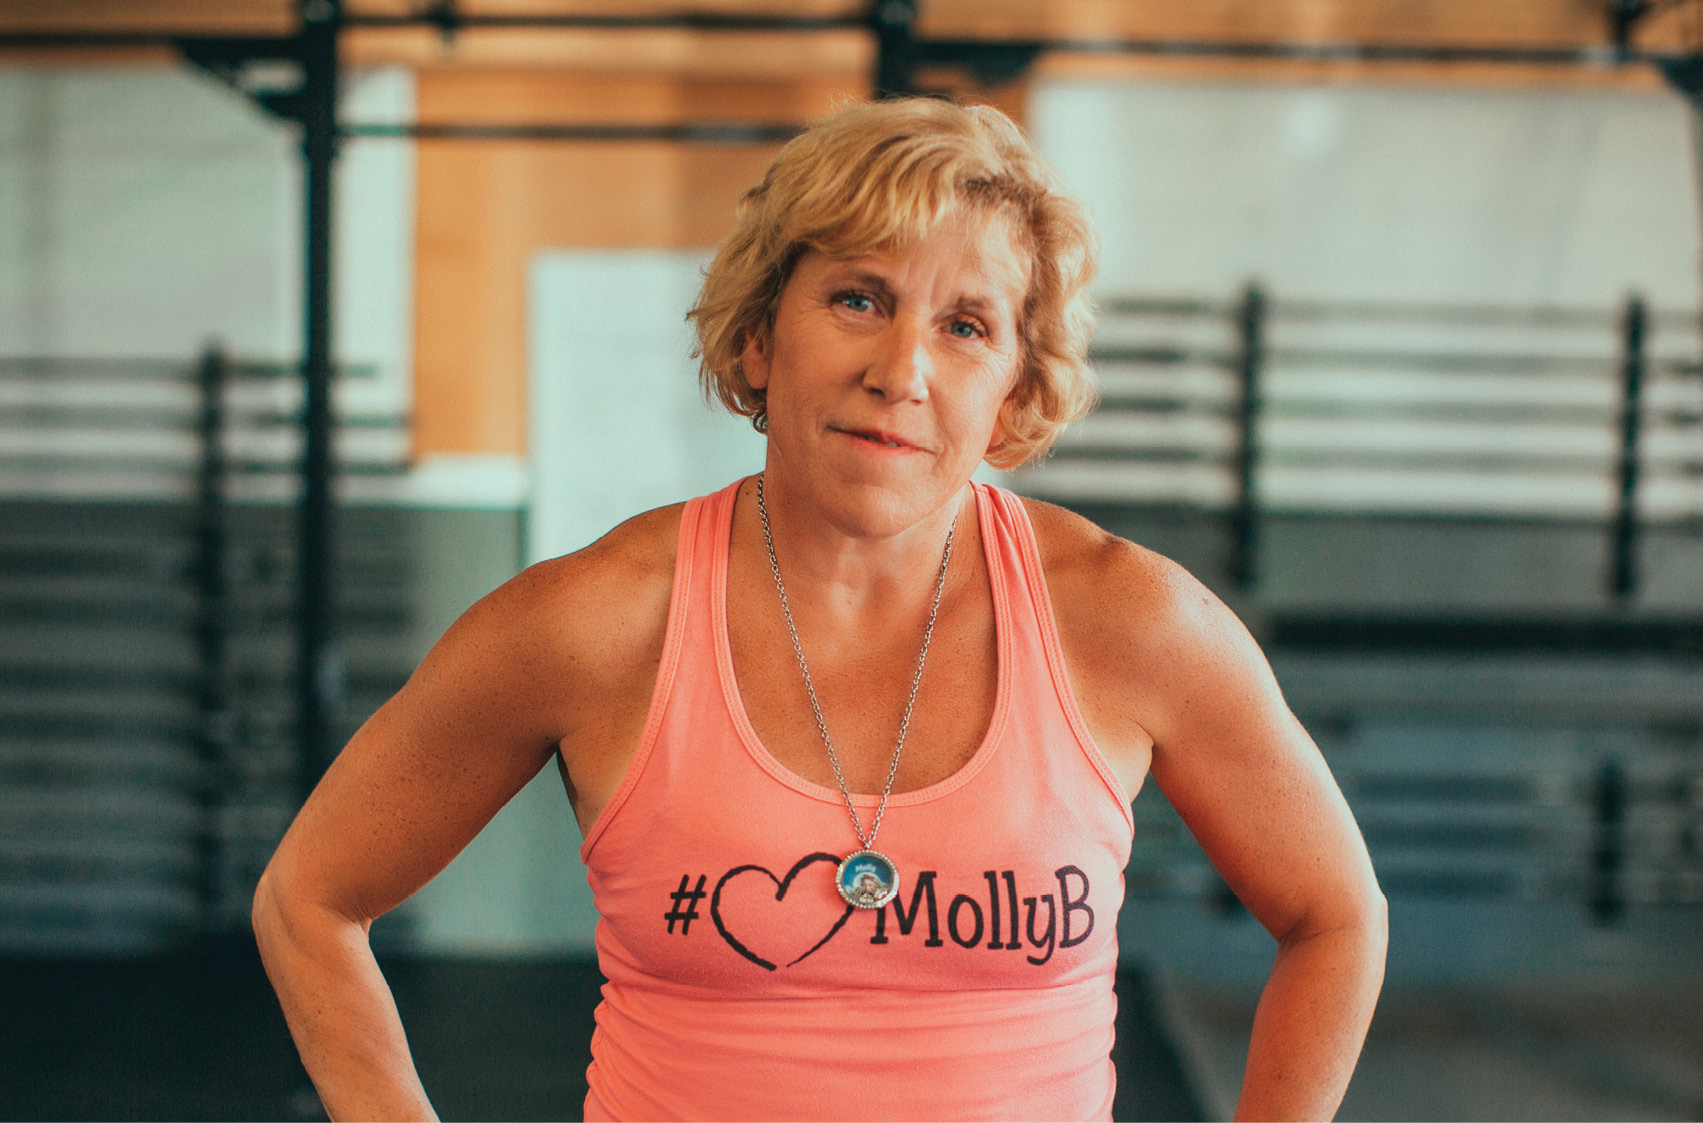 Barbara in a pink tank top with the #MollyB hashtag, for her daughter, at the gym.